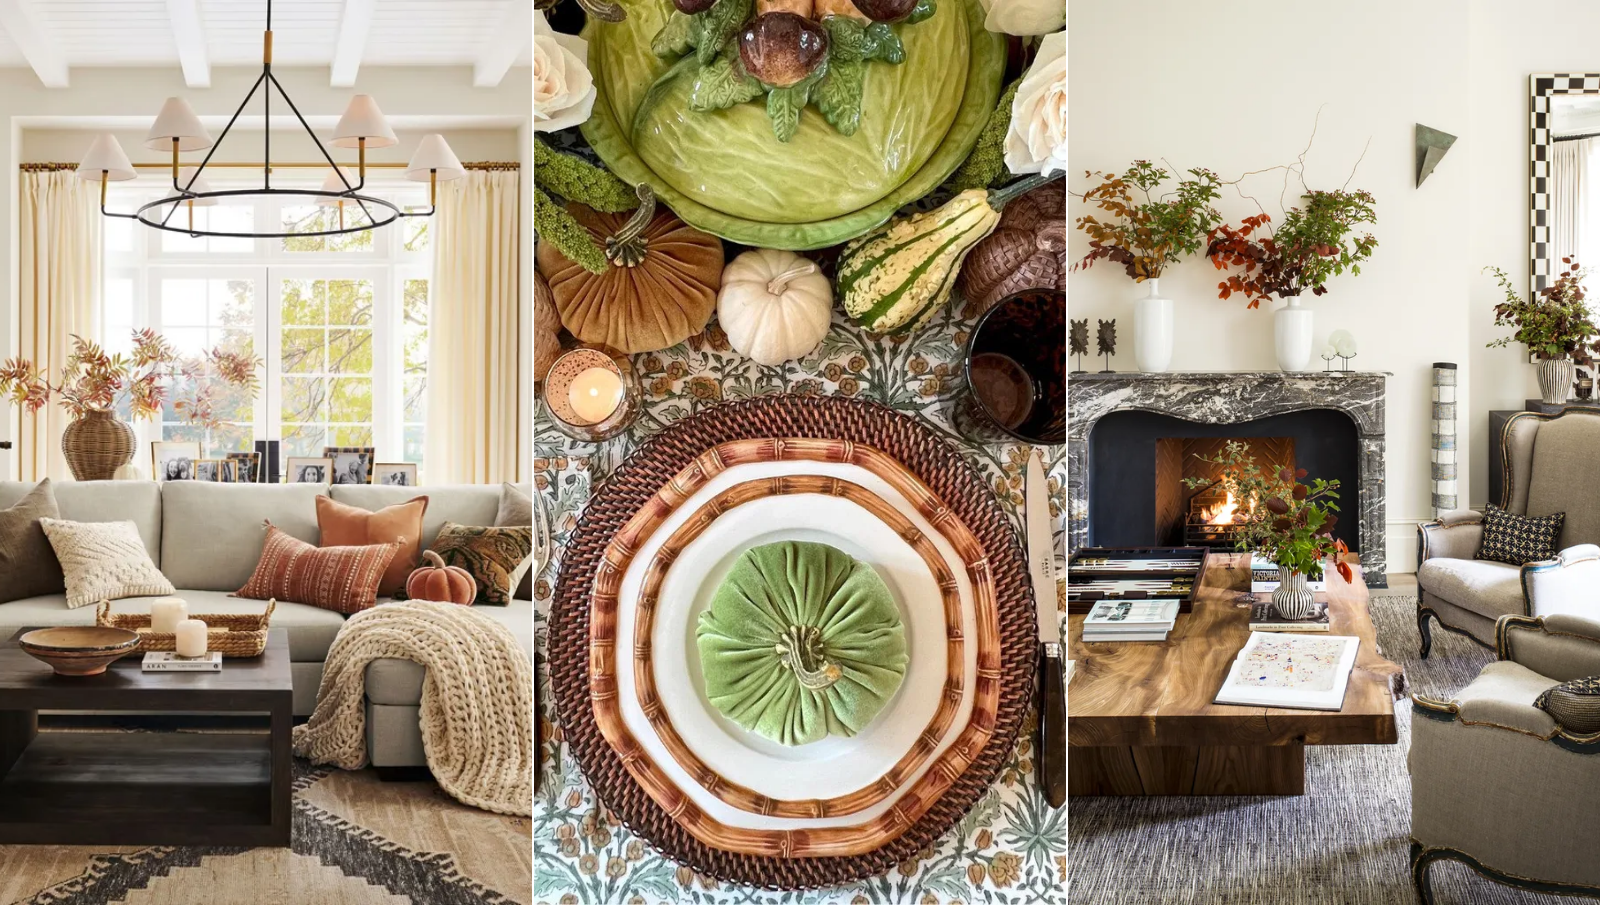 7 Boho Design Ideas That You Can Bring Home, With Gorgeous Results